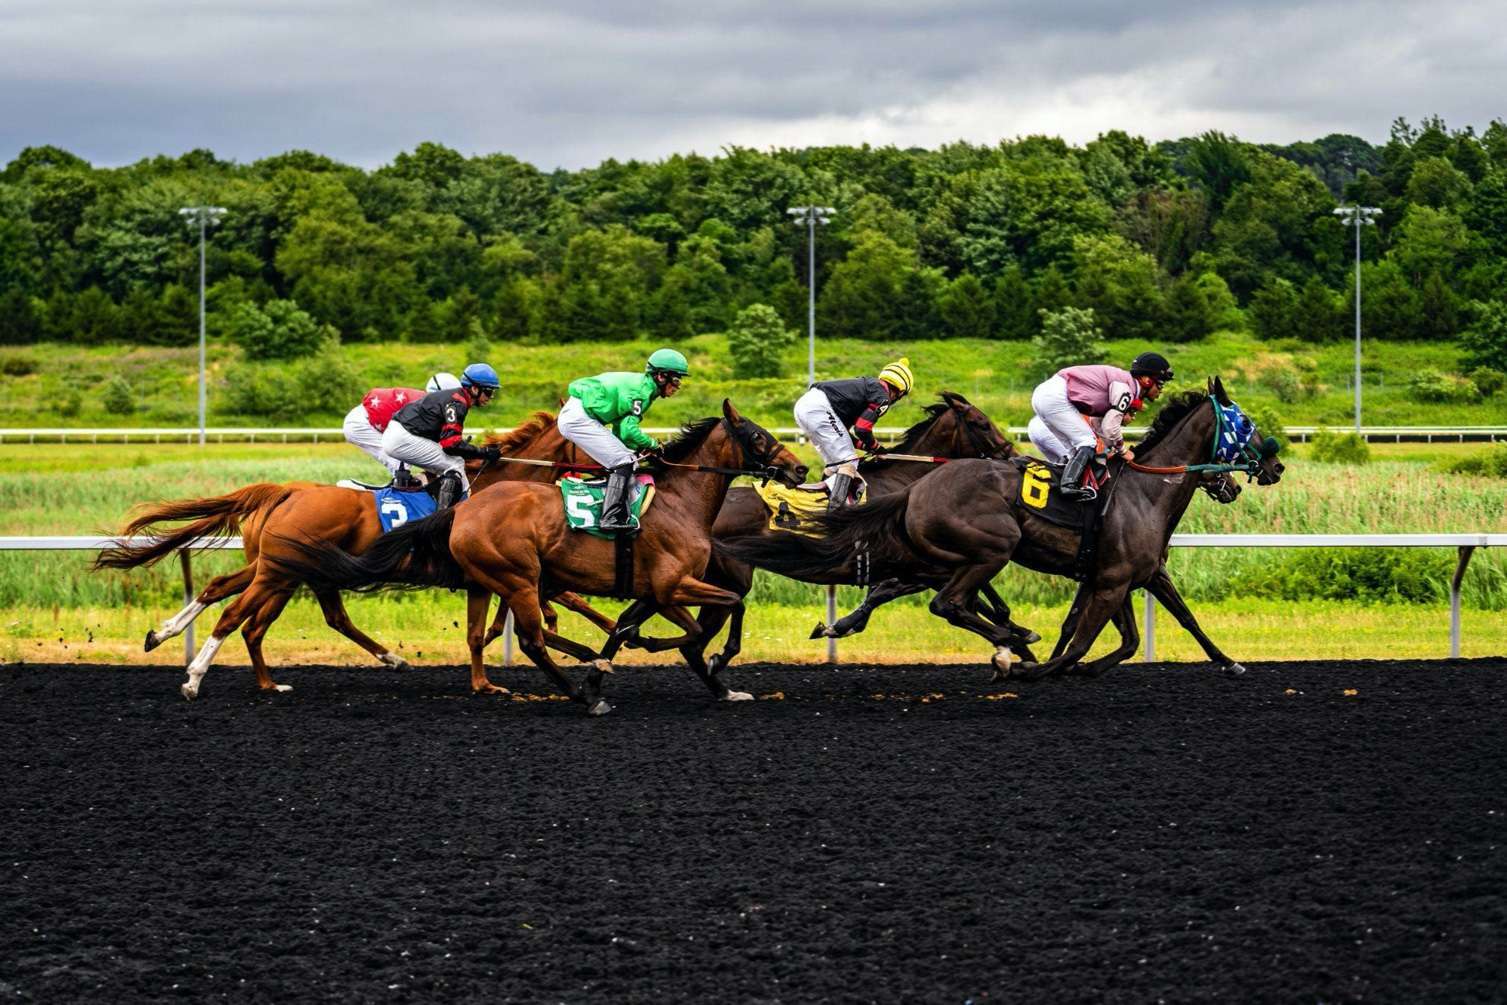 8 Different Types of Horse Races - horses racing on a dark surface